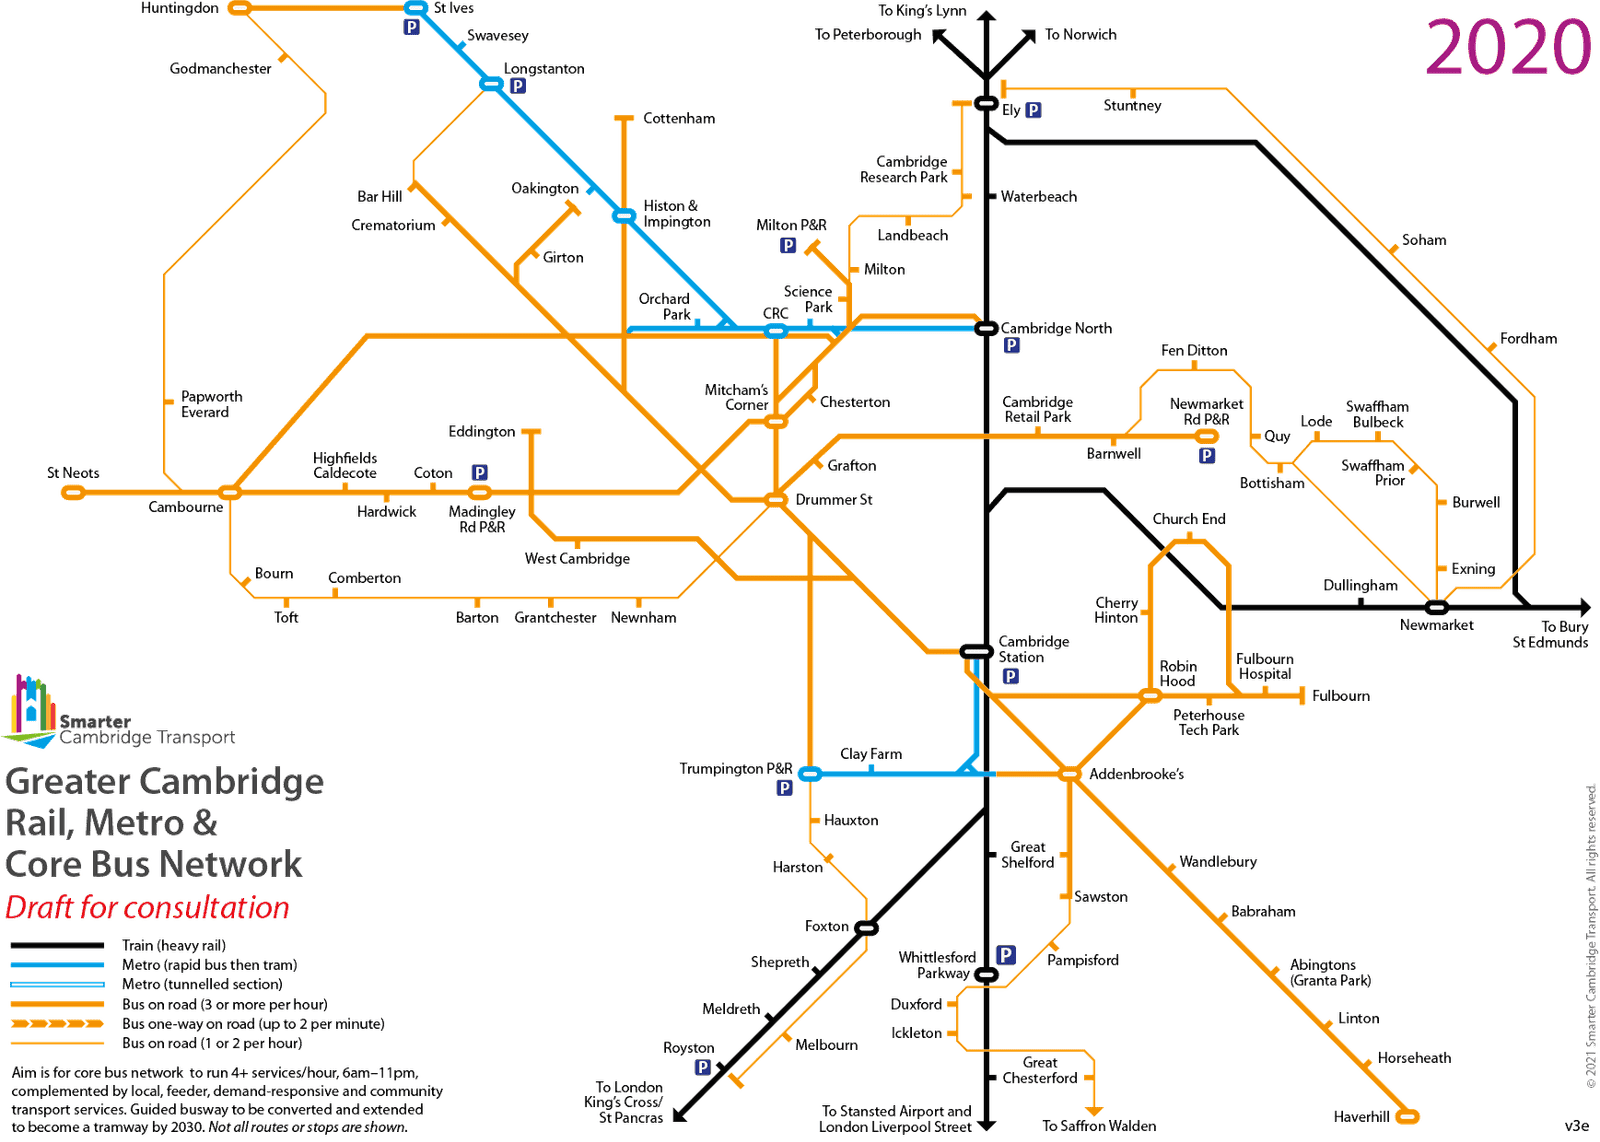 Schematic map of rail and bus network in Cambridge in 2020